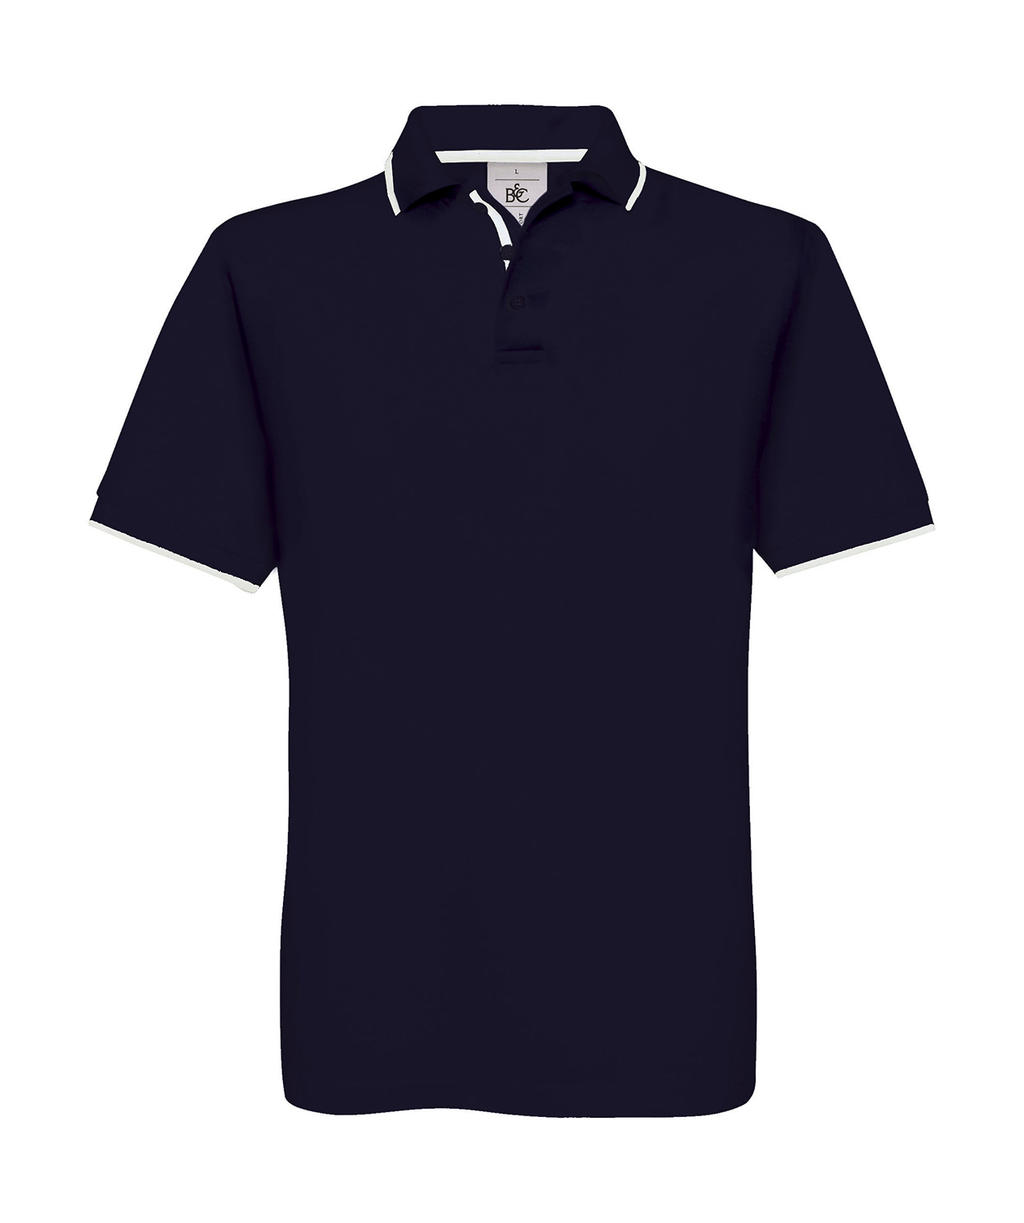  Safran Sport Tipped Polo in Farbe Navy/White